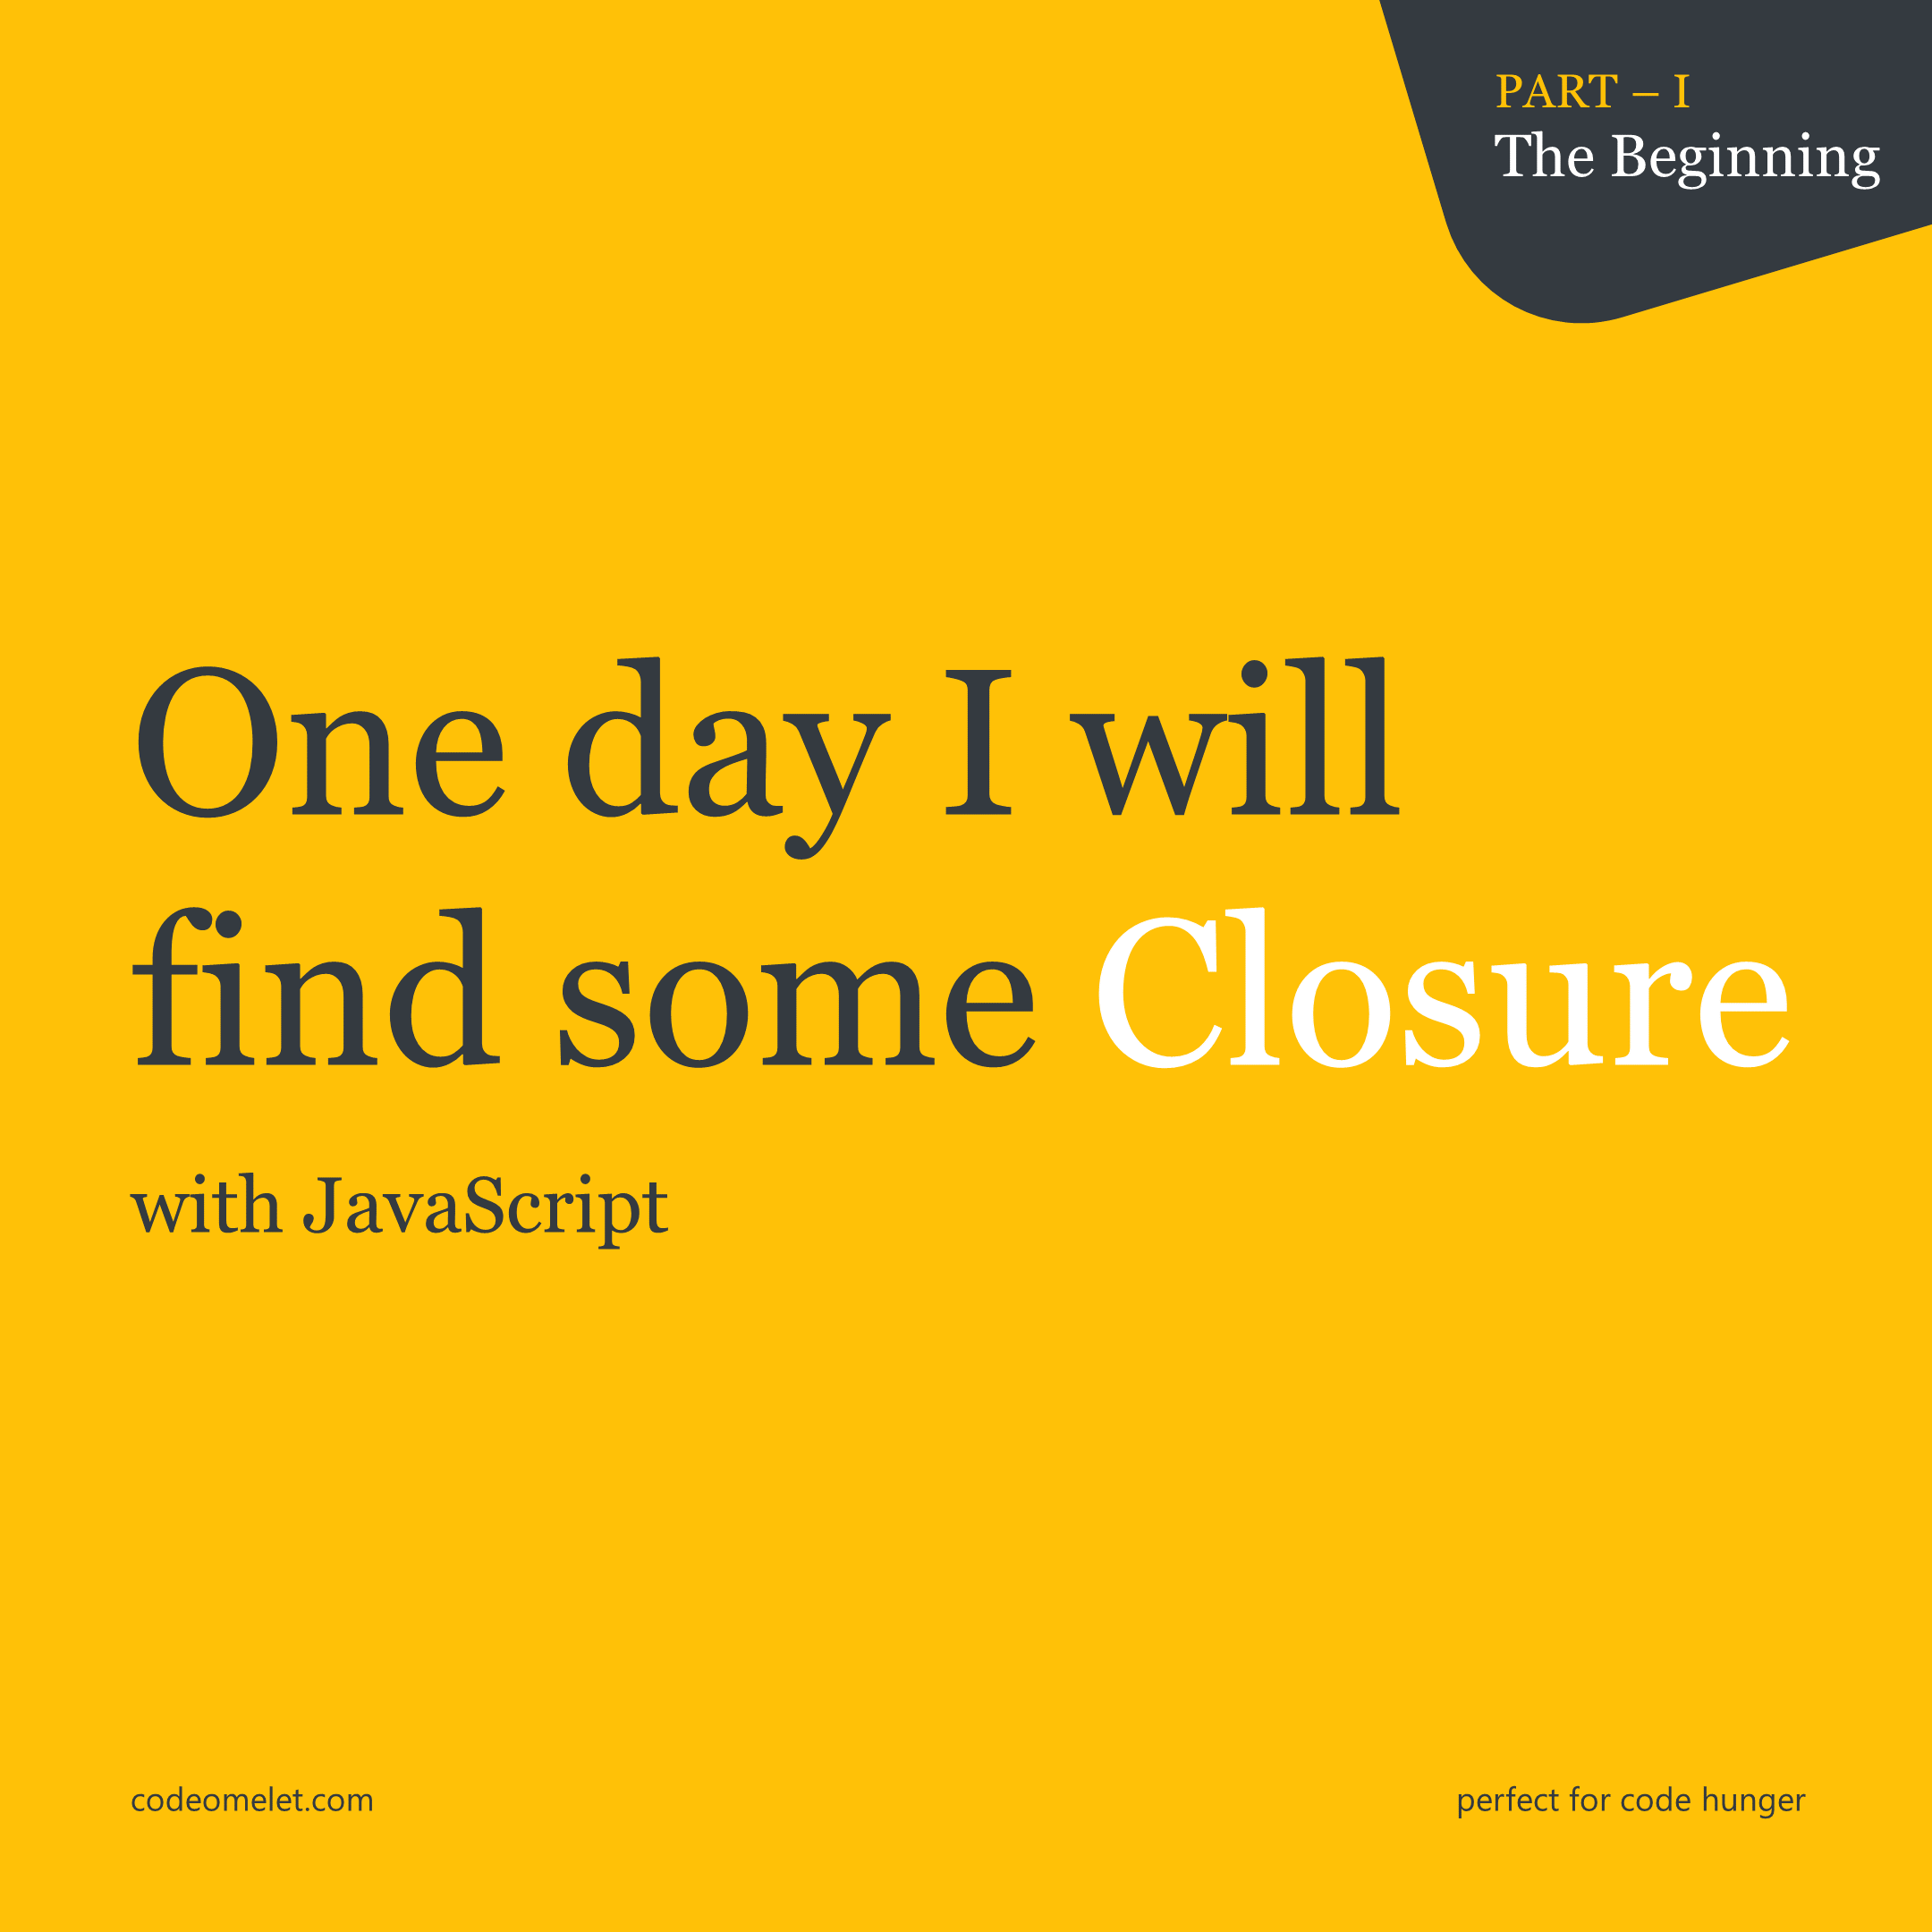 One day I will find some Closure